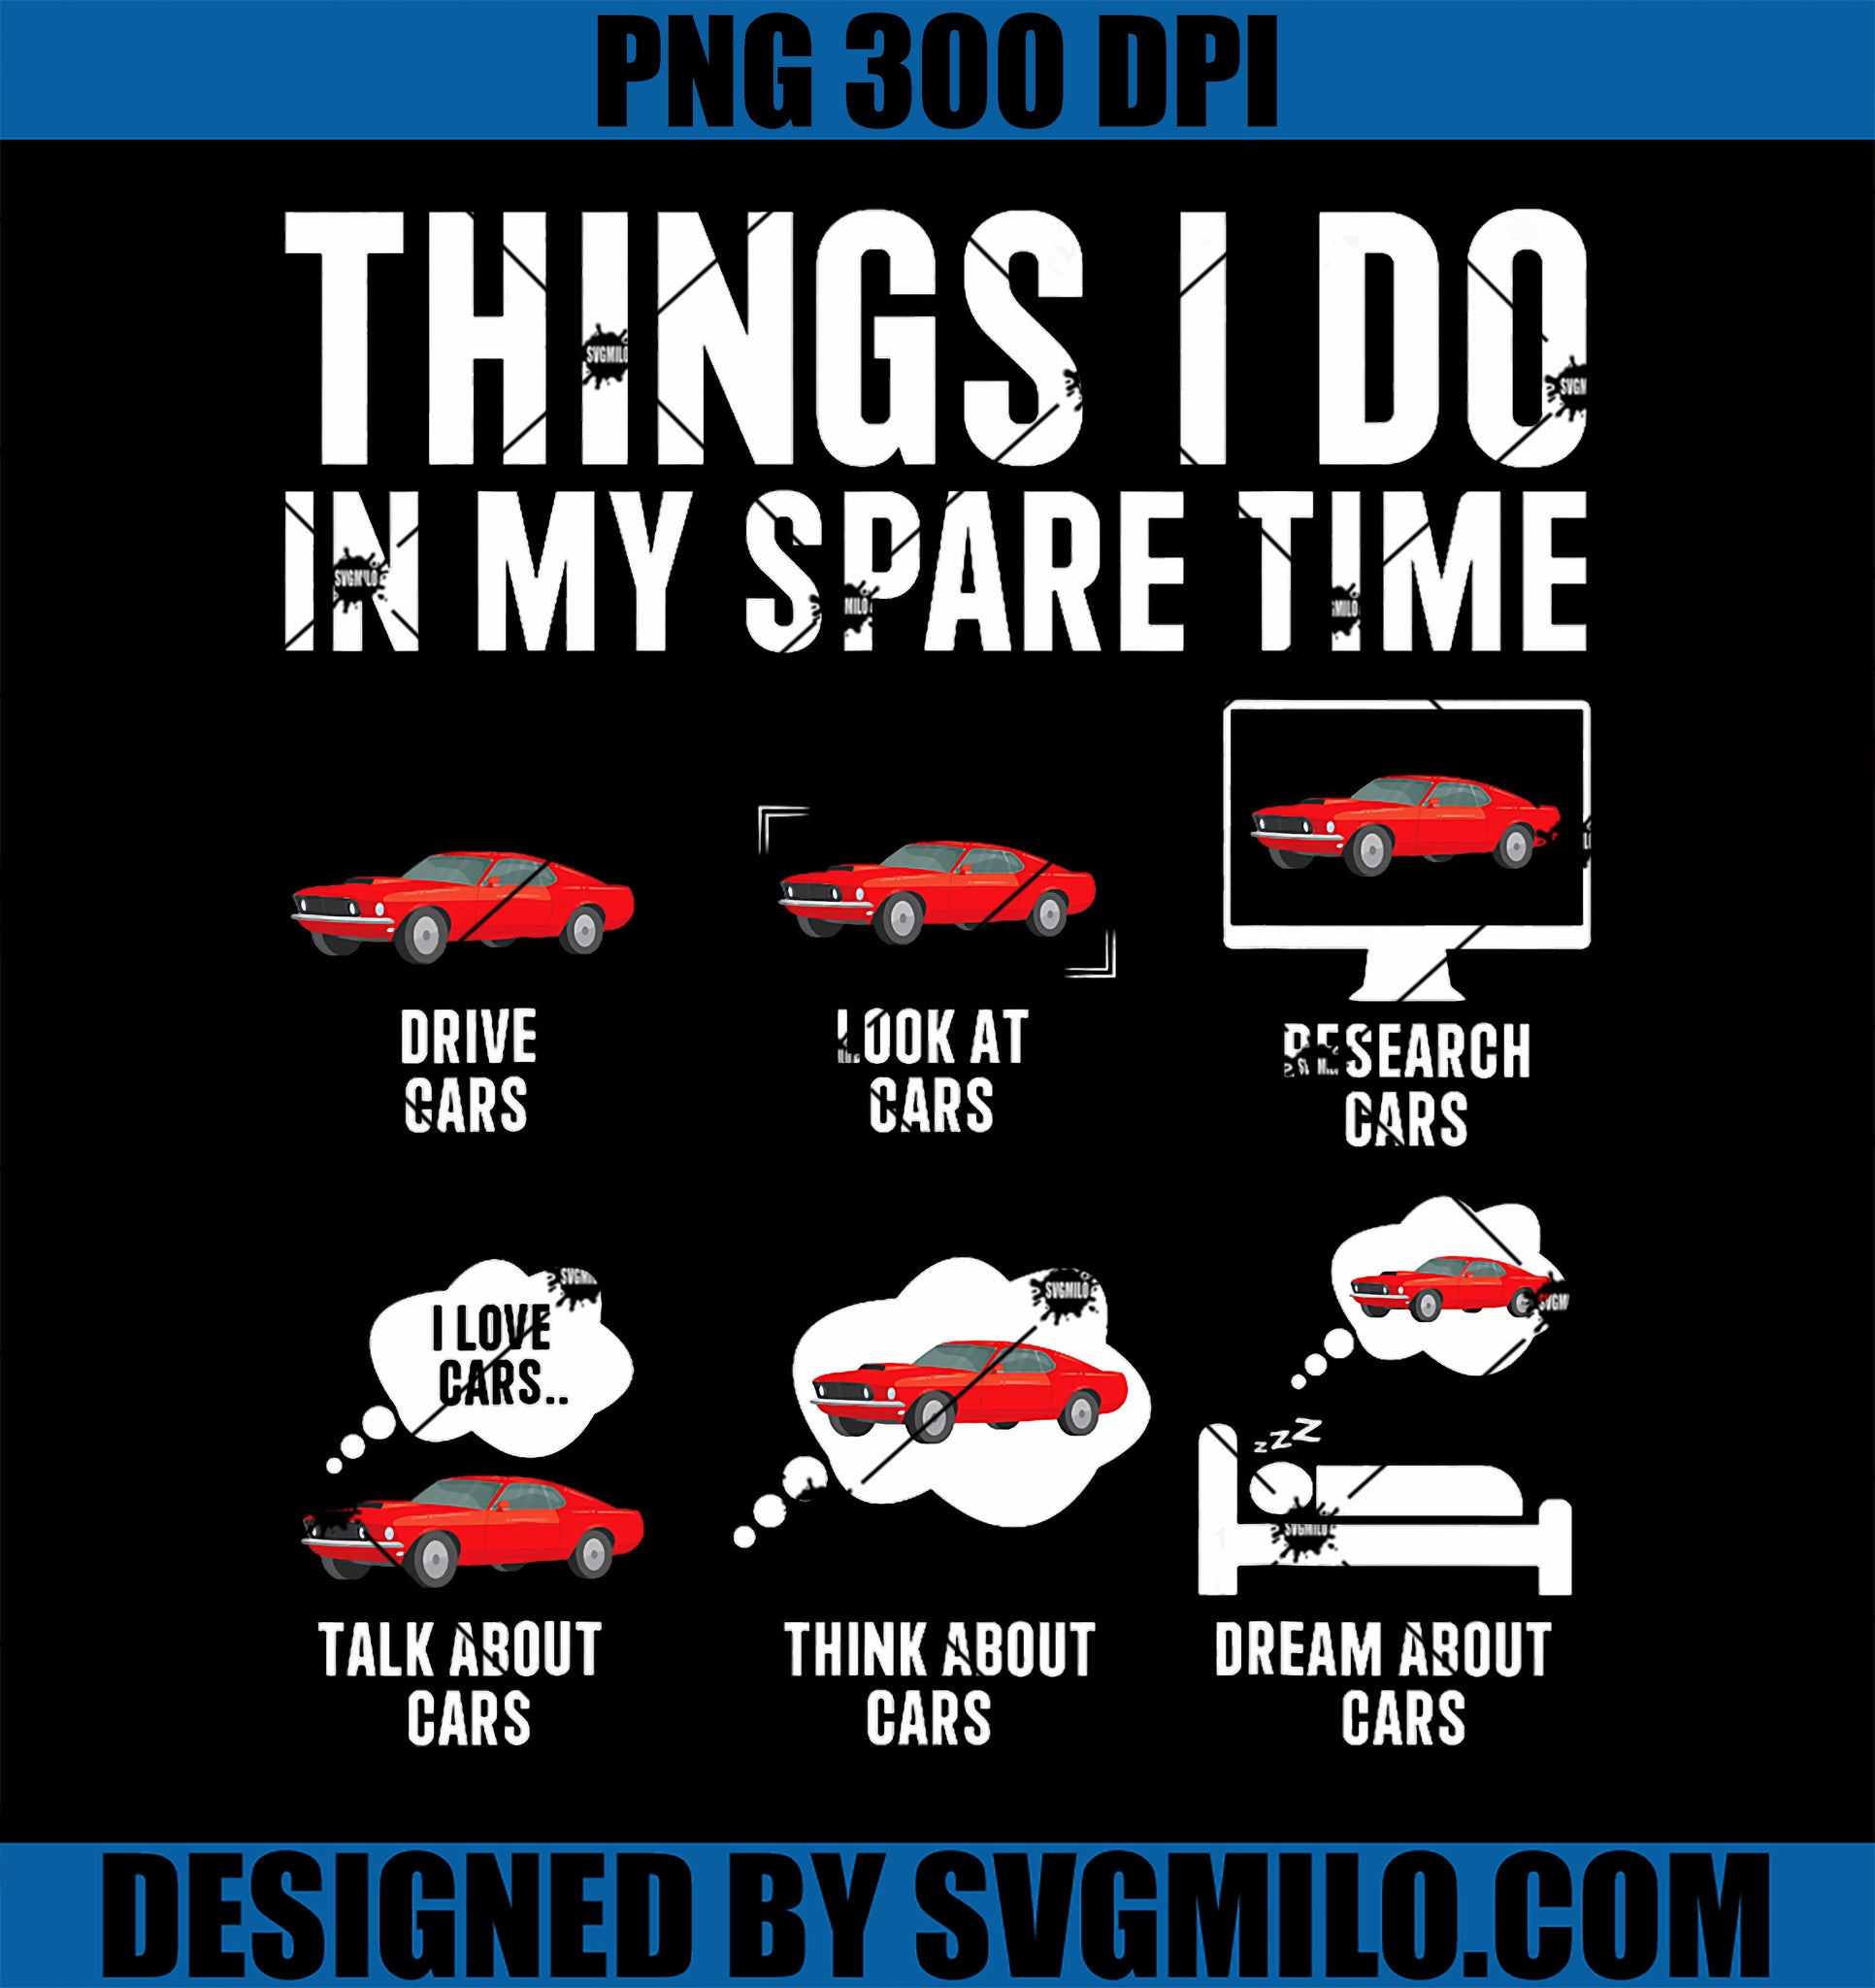 Things I Do In My Spare Time PNG, Funny Car Enthusiast Car Lover PNG